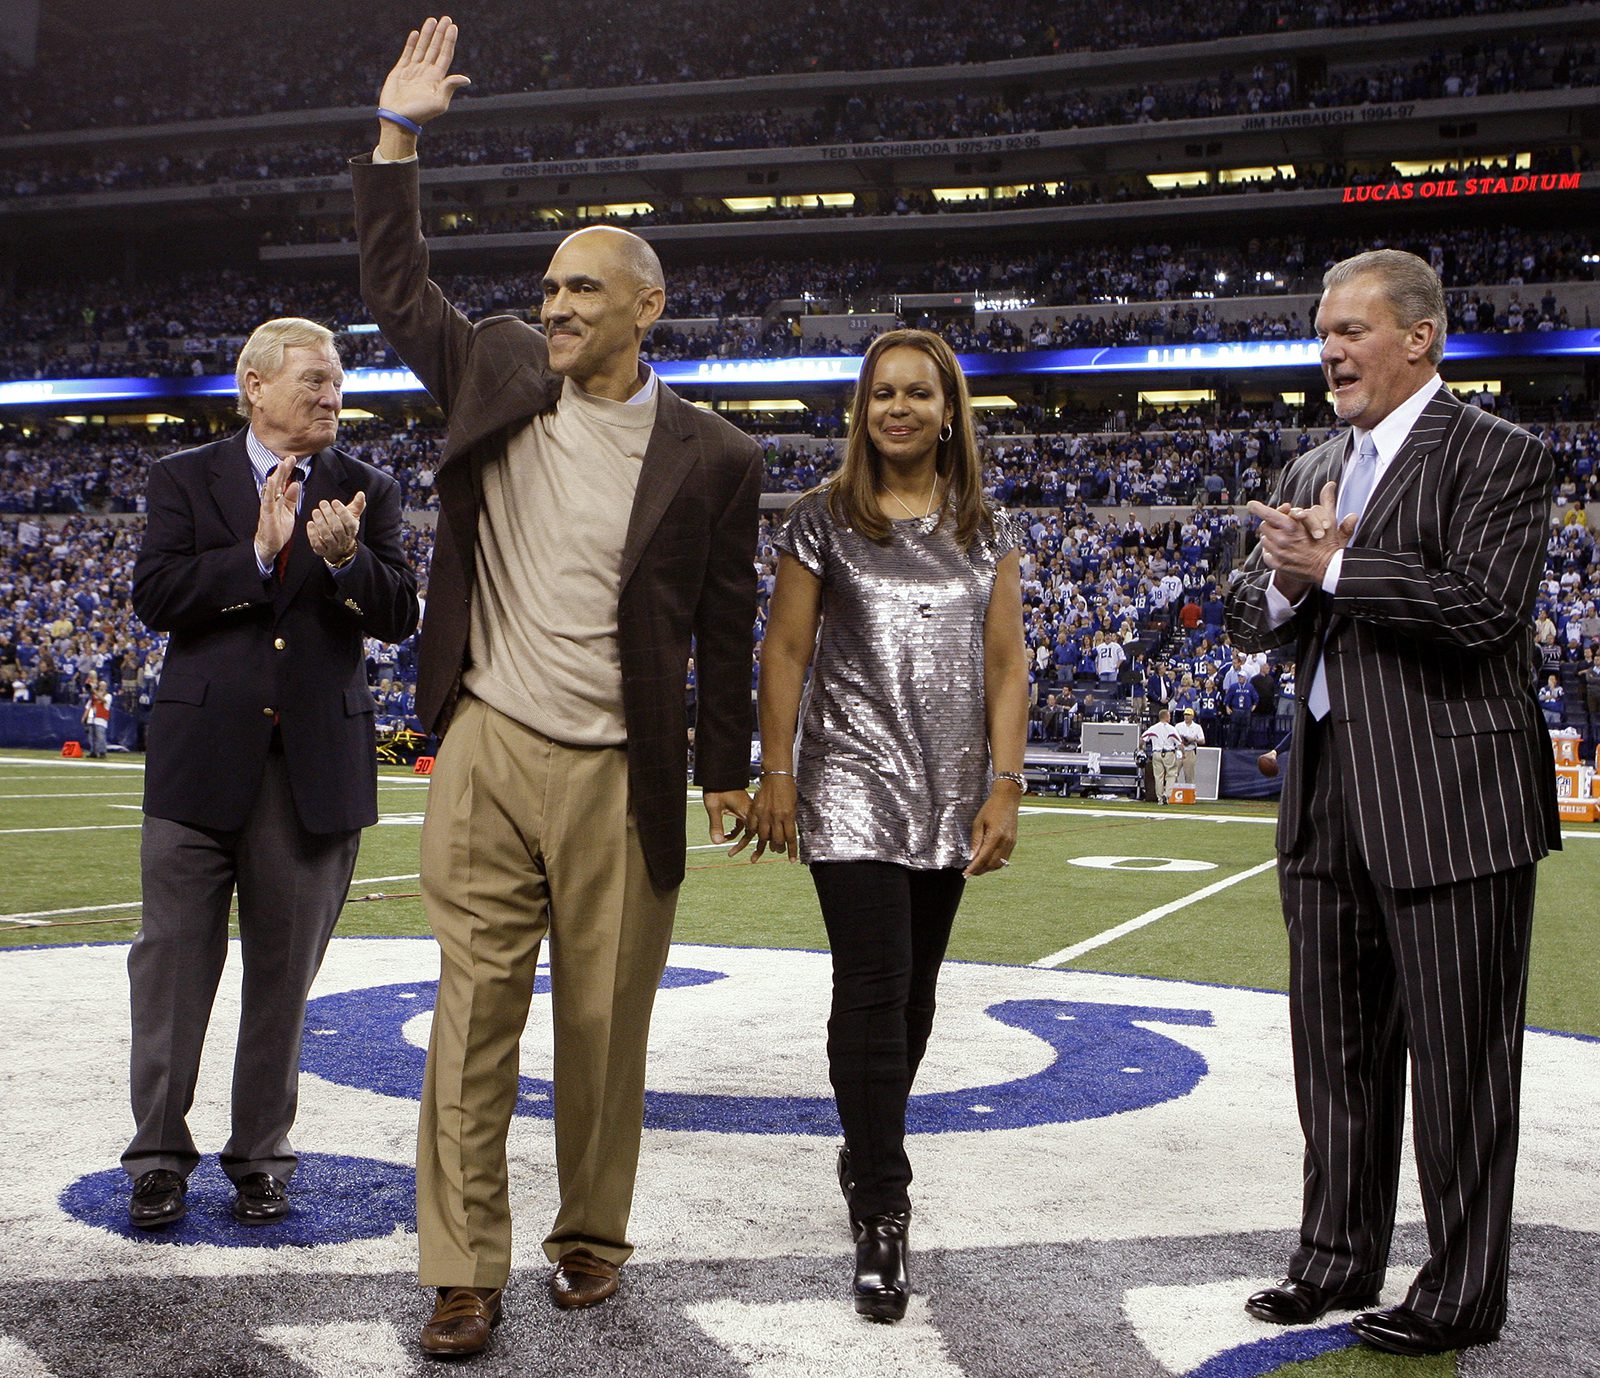 Former Indianapolis Colts coach Tony Dungy and his wife, Lauren, walk off the field after Dungy was inducted into the Colts Ring of Honor during an NFL football game in Indianapolis, Monday, Nov. 1, 2010. Indianapolis Colts president Bill Polian is at left, while Colts owner Jim Irsay is at right. (AP Photo/Darron Cummings)